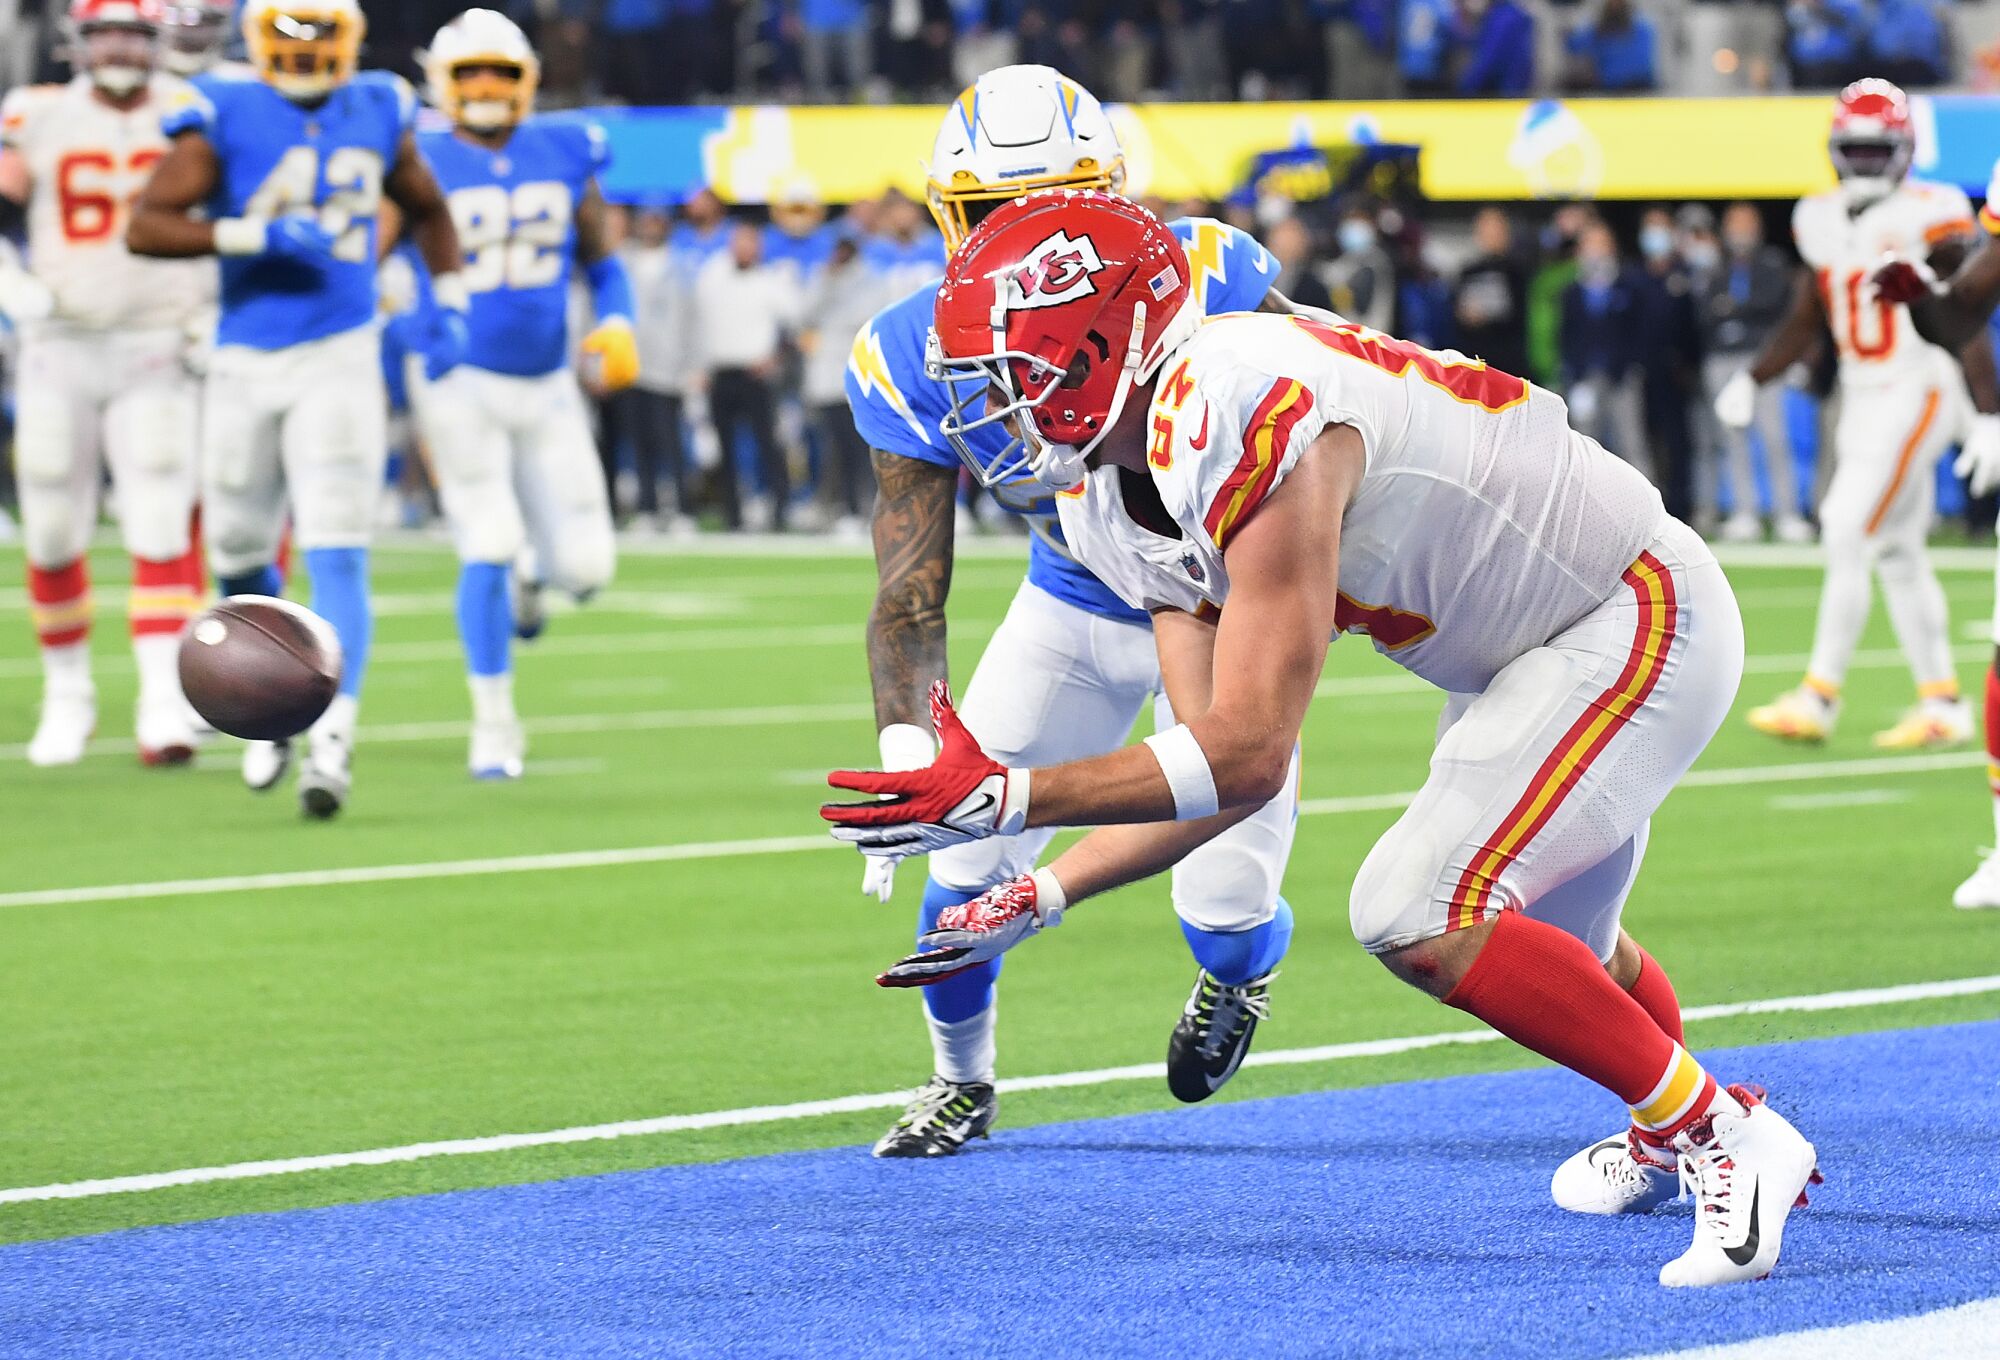 Chiefs tight end Travis Kelce catches a touchdown pass against the Chargers.